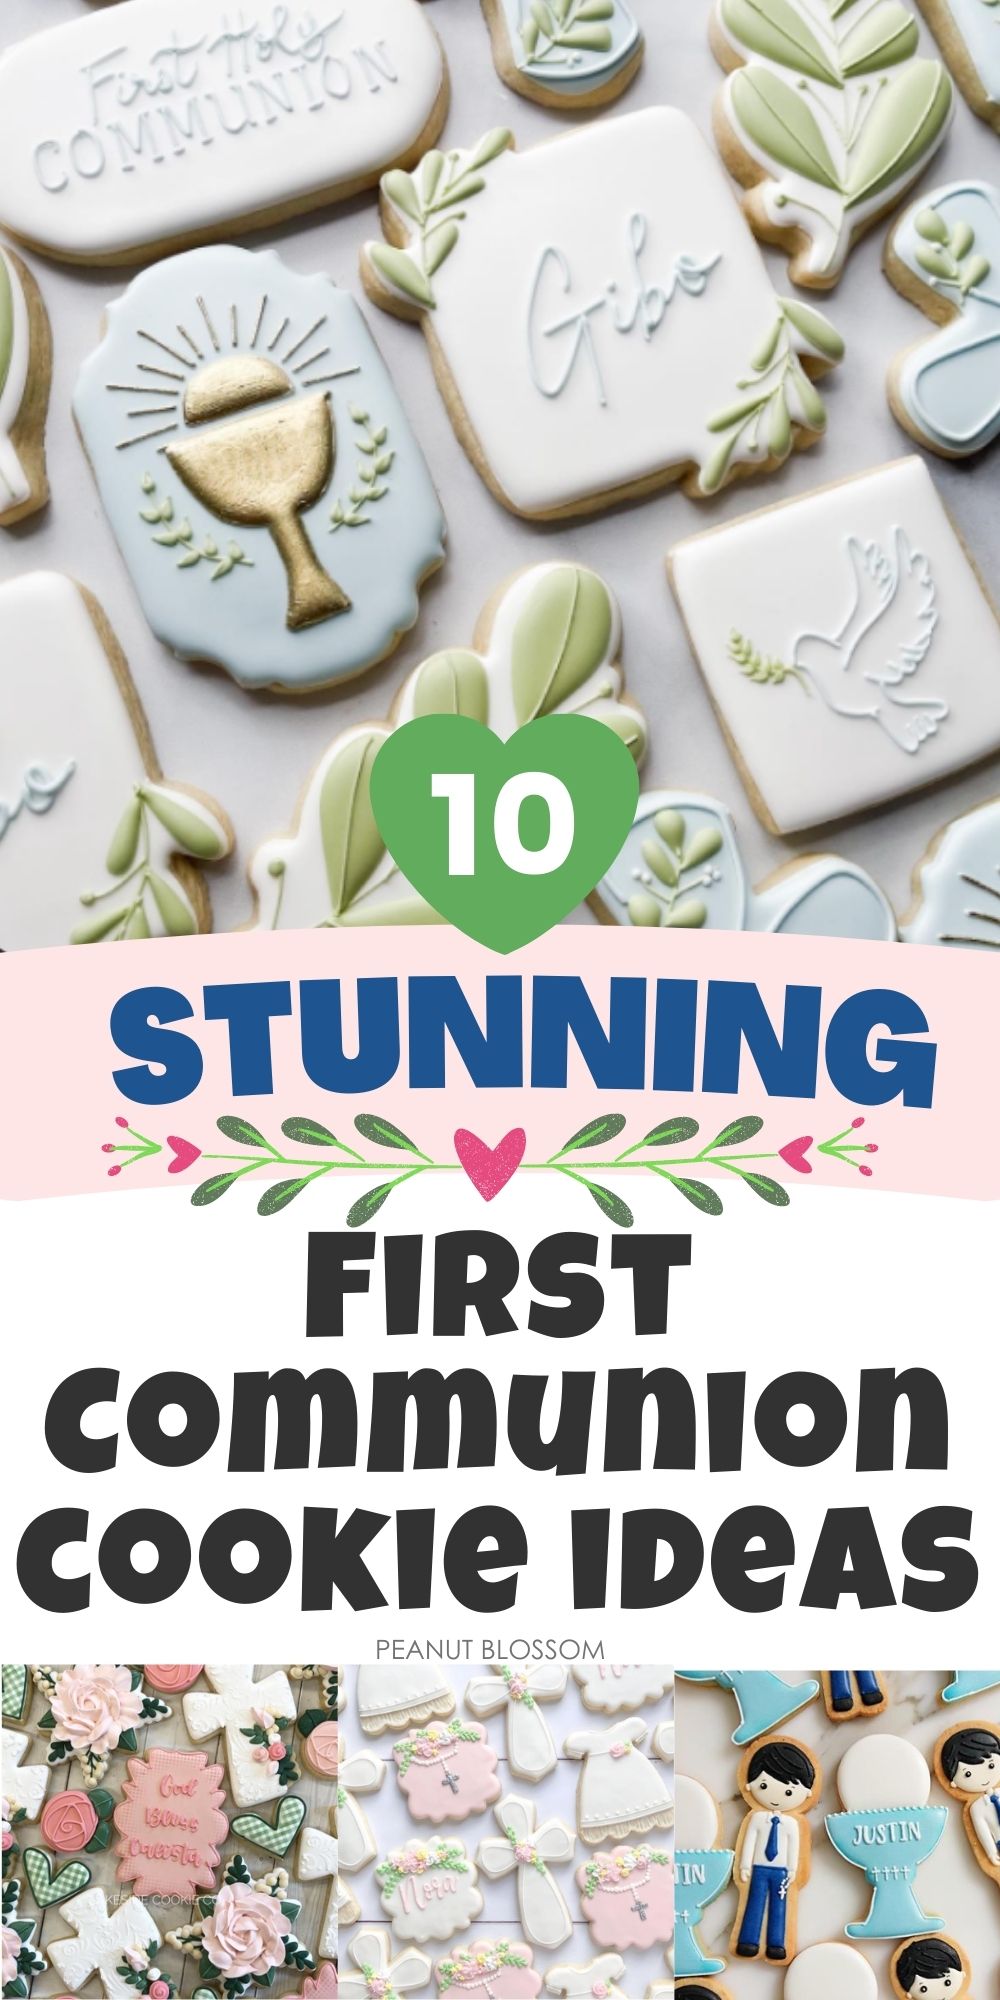 A photo collage shows several examples of the First Communion cookie ideas.